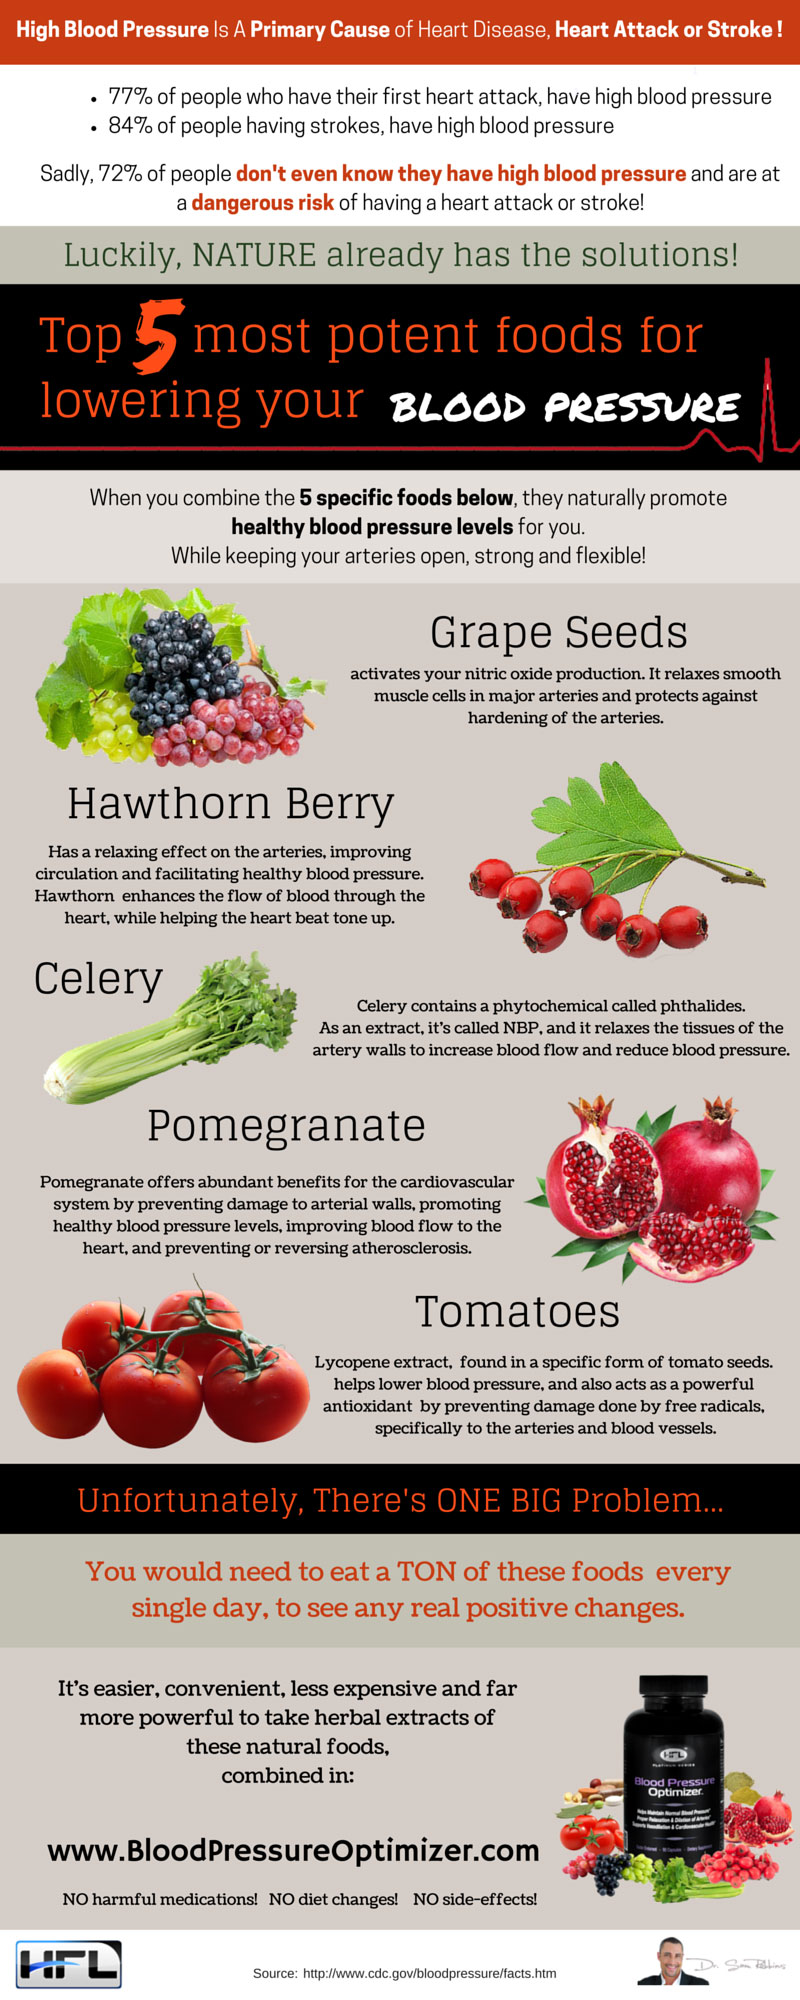 5-most-potent-foods-for-lowering-blood-pressure